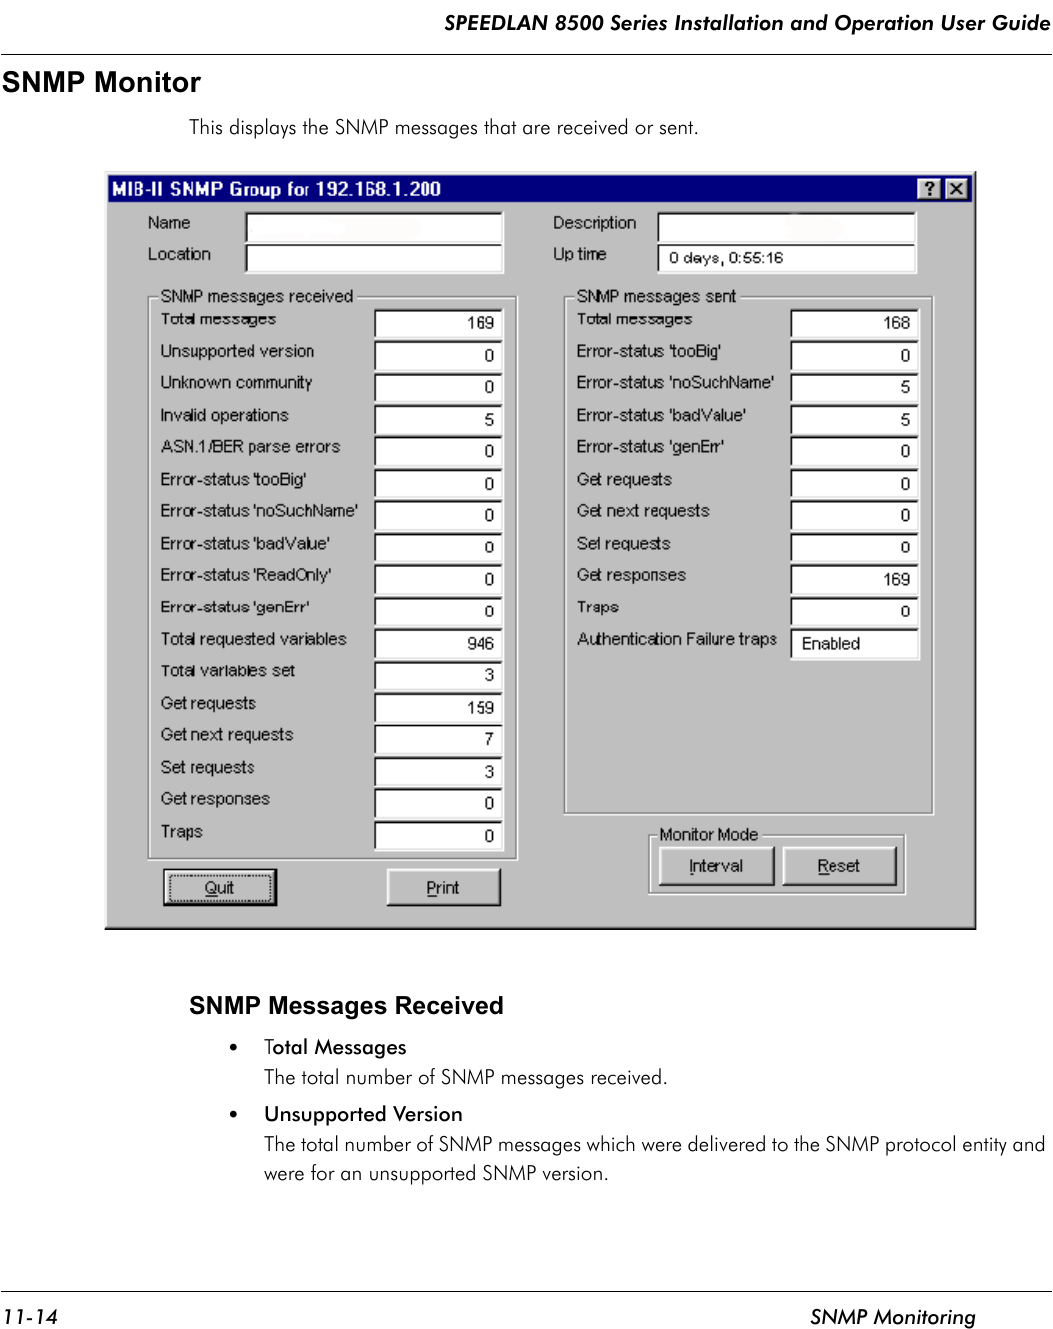 SPEEDLAN 8500 Series Installation and Operation User Guide 11-14 SNMP MonitoringSNMP Monitor This displays the SNMP messages that are received or sent.SNMP Messages Received •Total MessagesThe total number of SNMP messages received. •Unsupported VersionThe total number of SNMP messages which were delivered to the SNMP protocol entity and were for an unsupported SNMP version. 